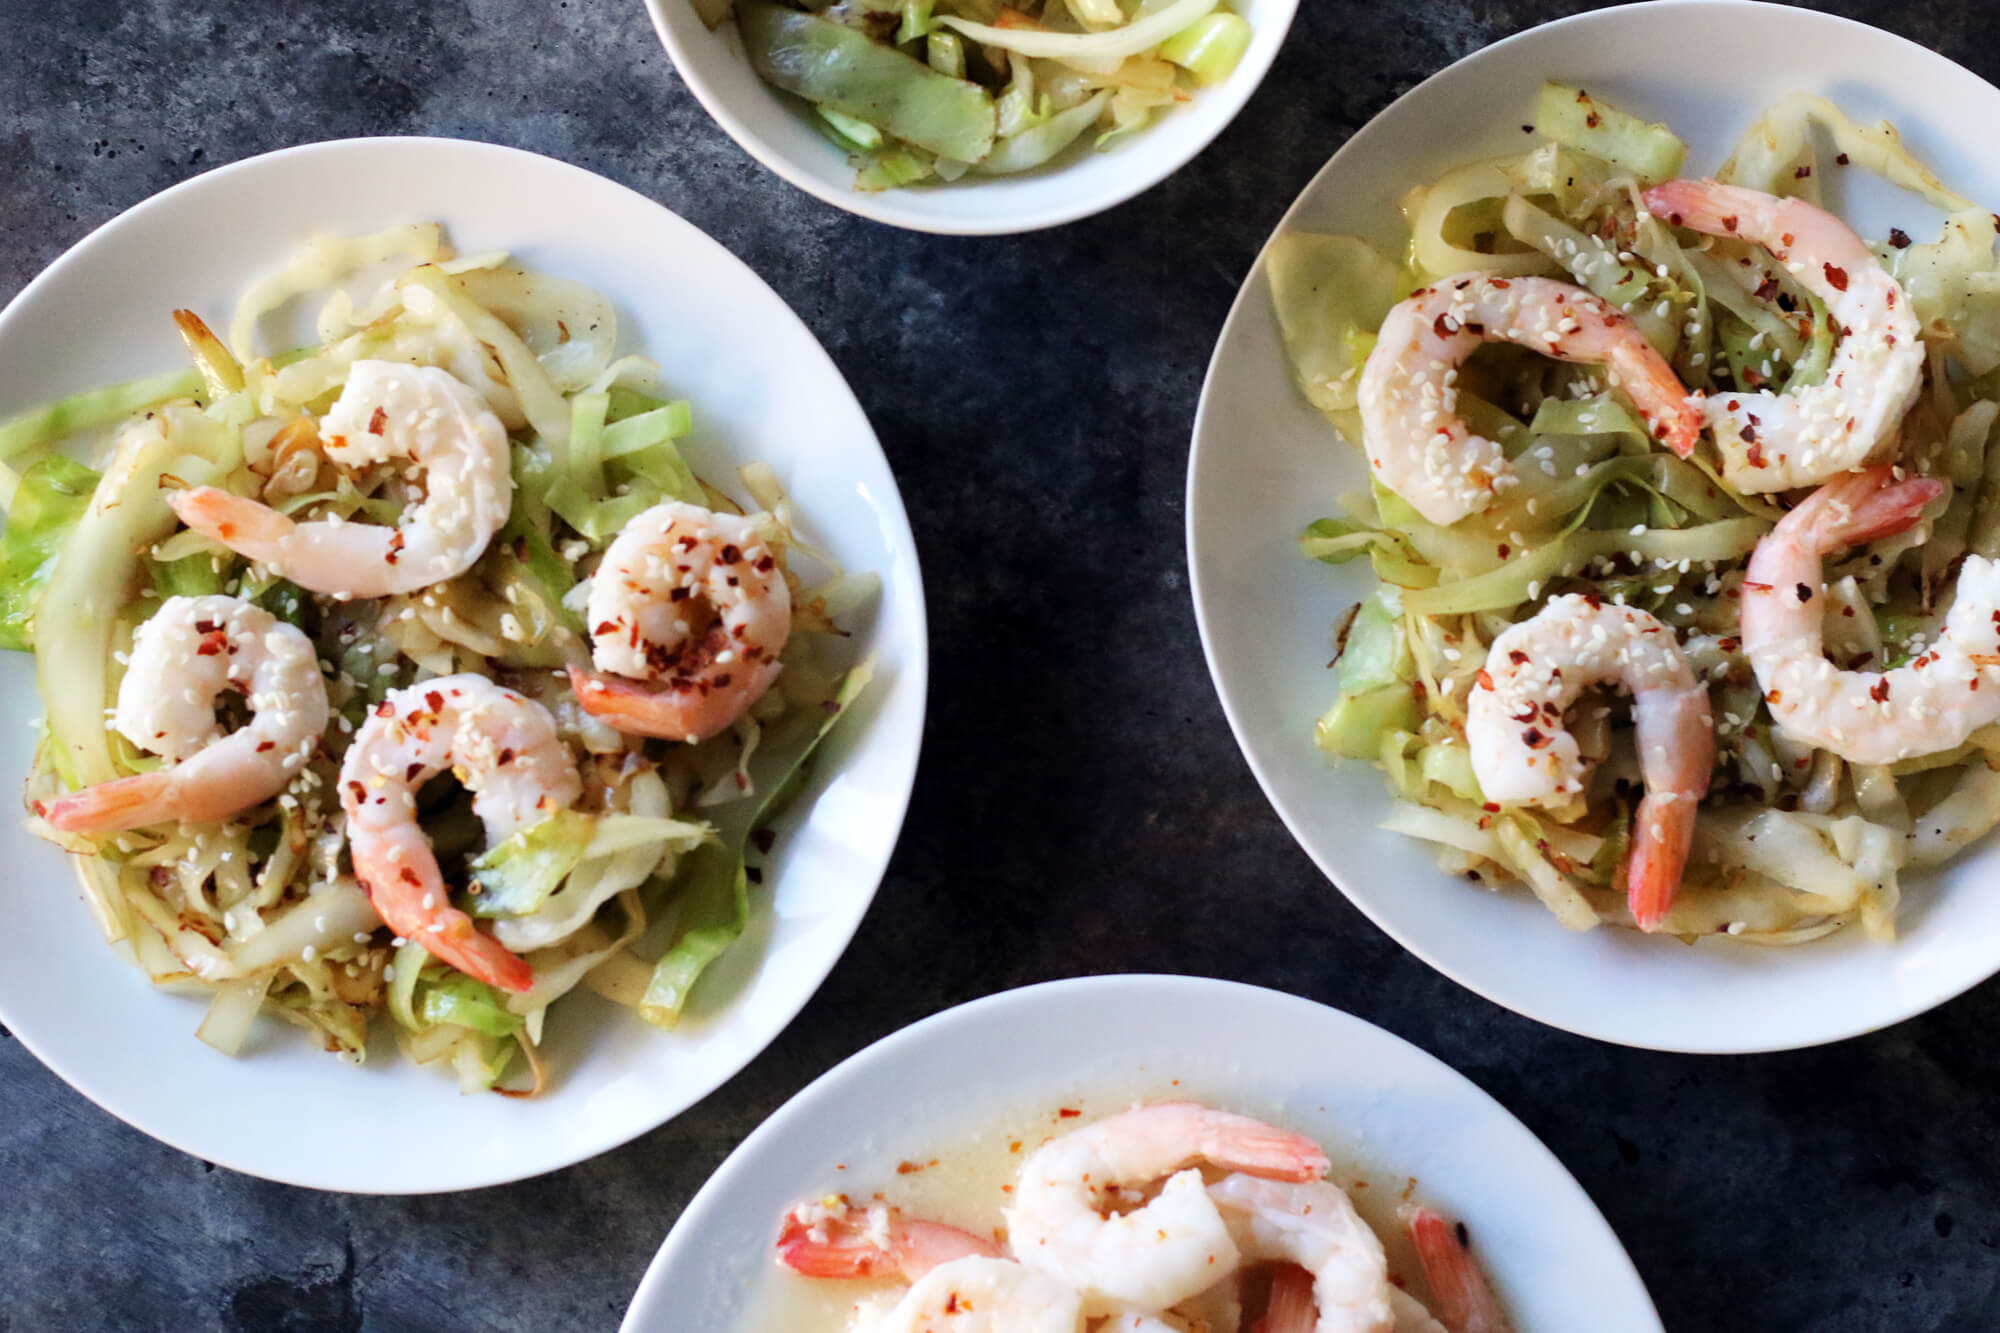 20 Meal Ideas to Help Clients Manage Arthritis: 15 Minute Shrimp & Cabbage Stir Fry